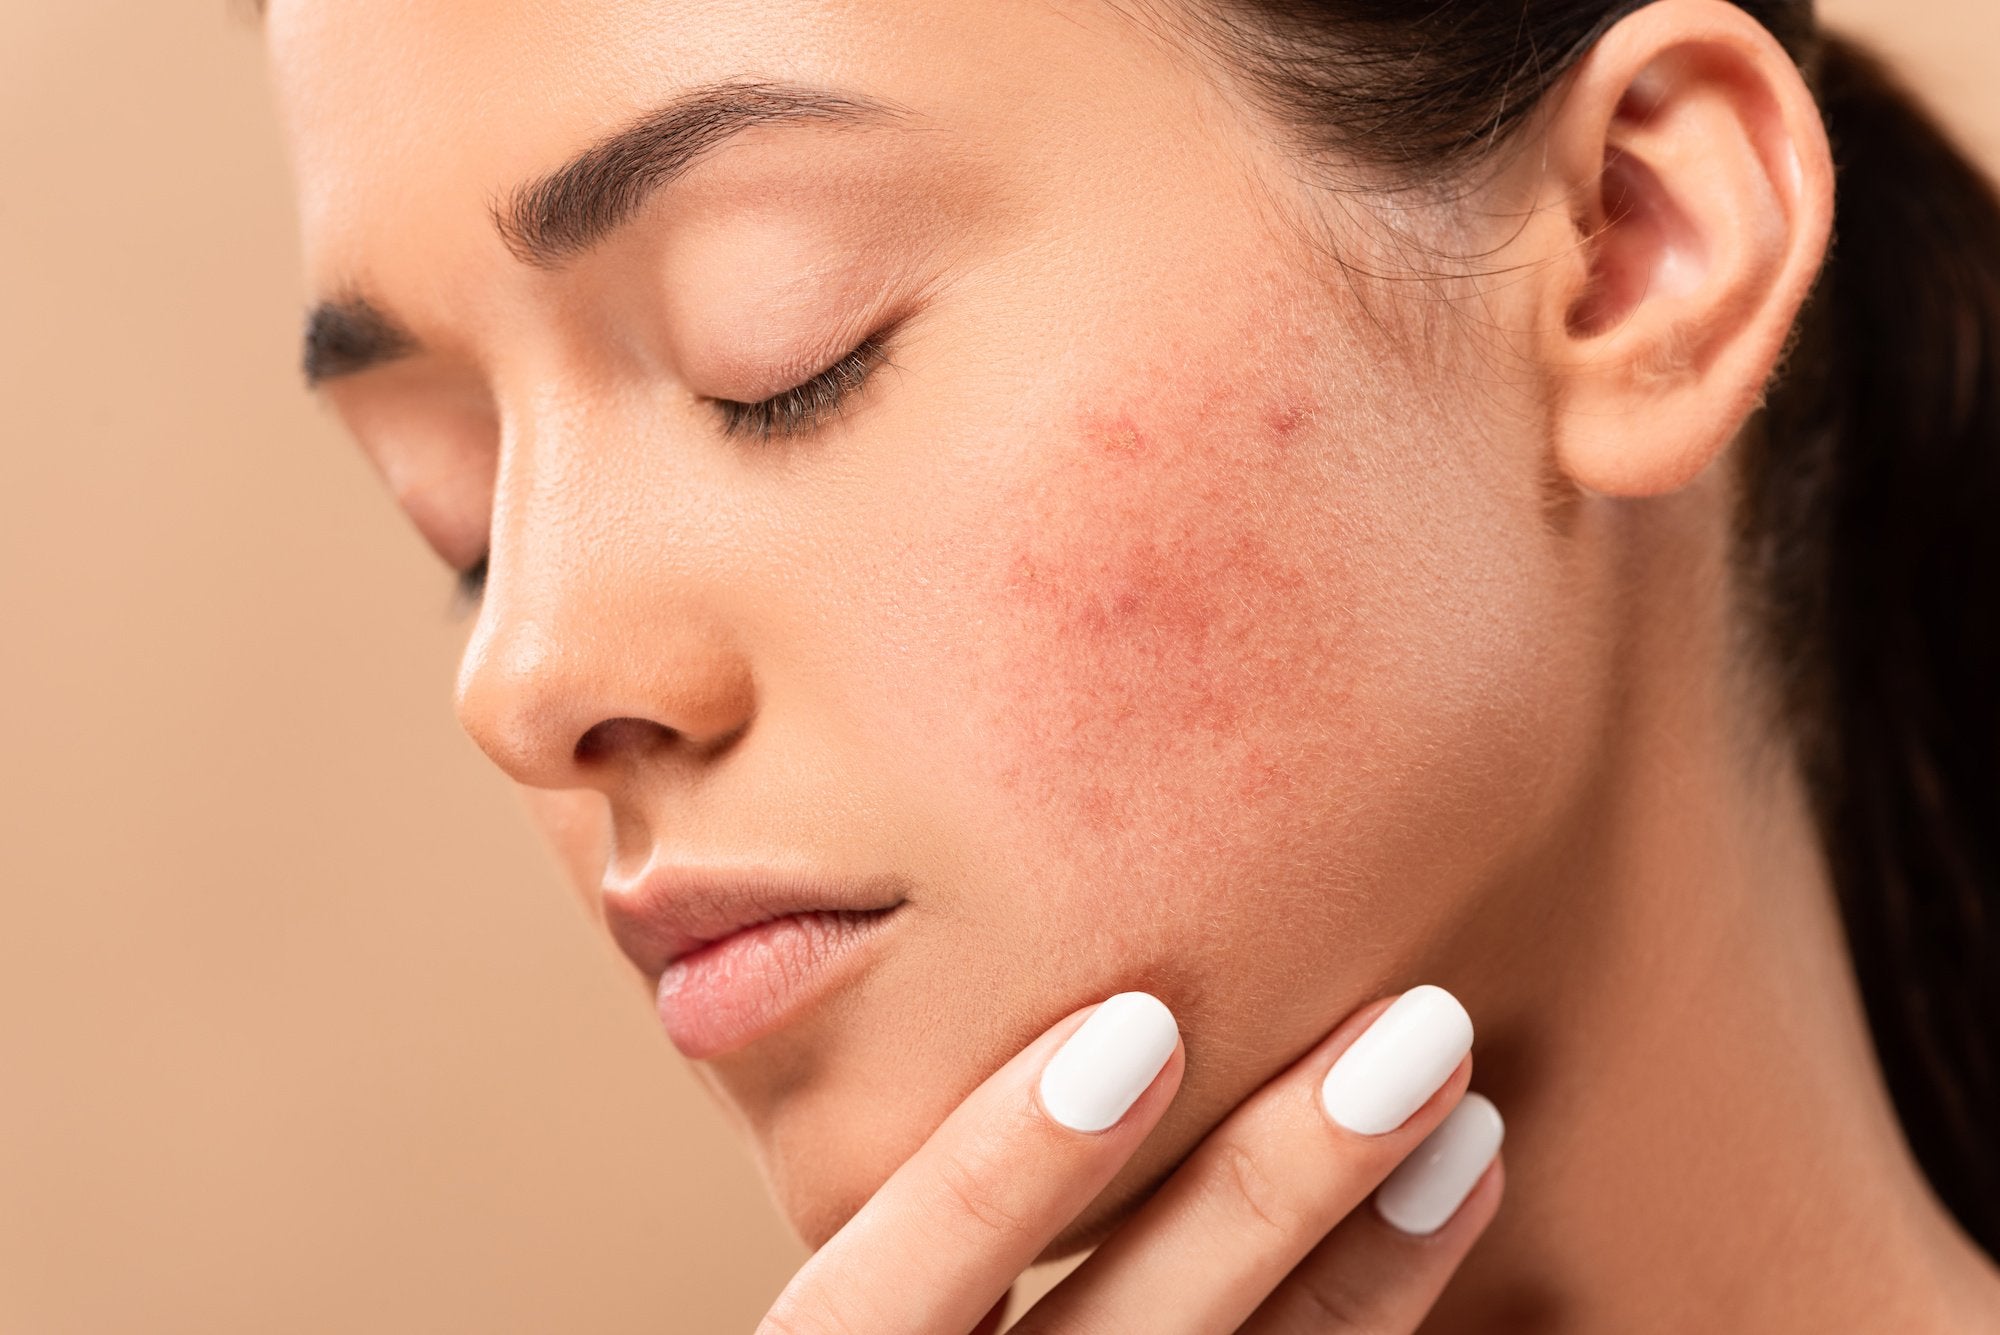 Dealing with Adult Acne